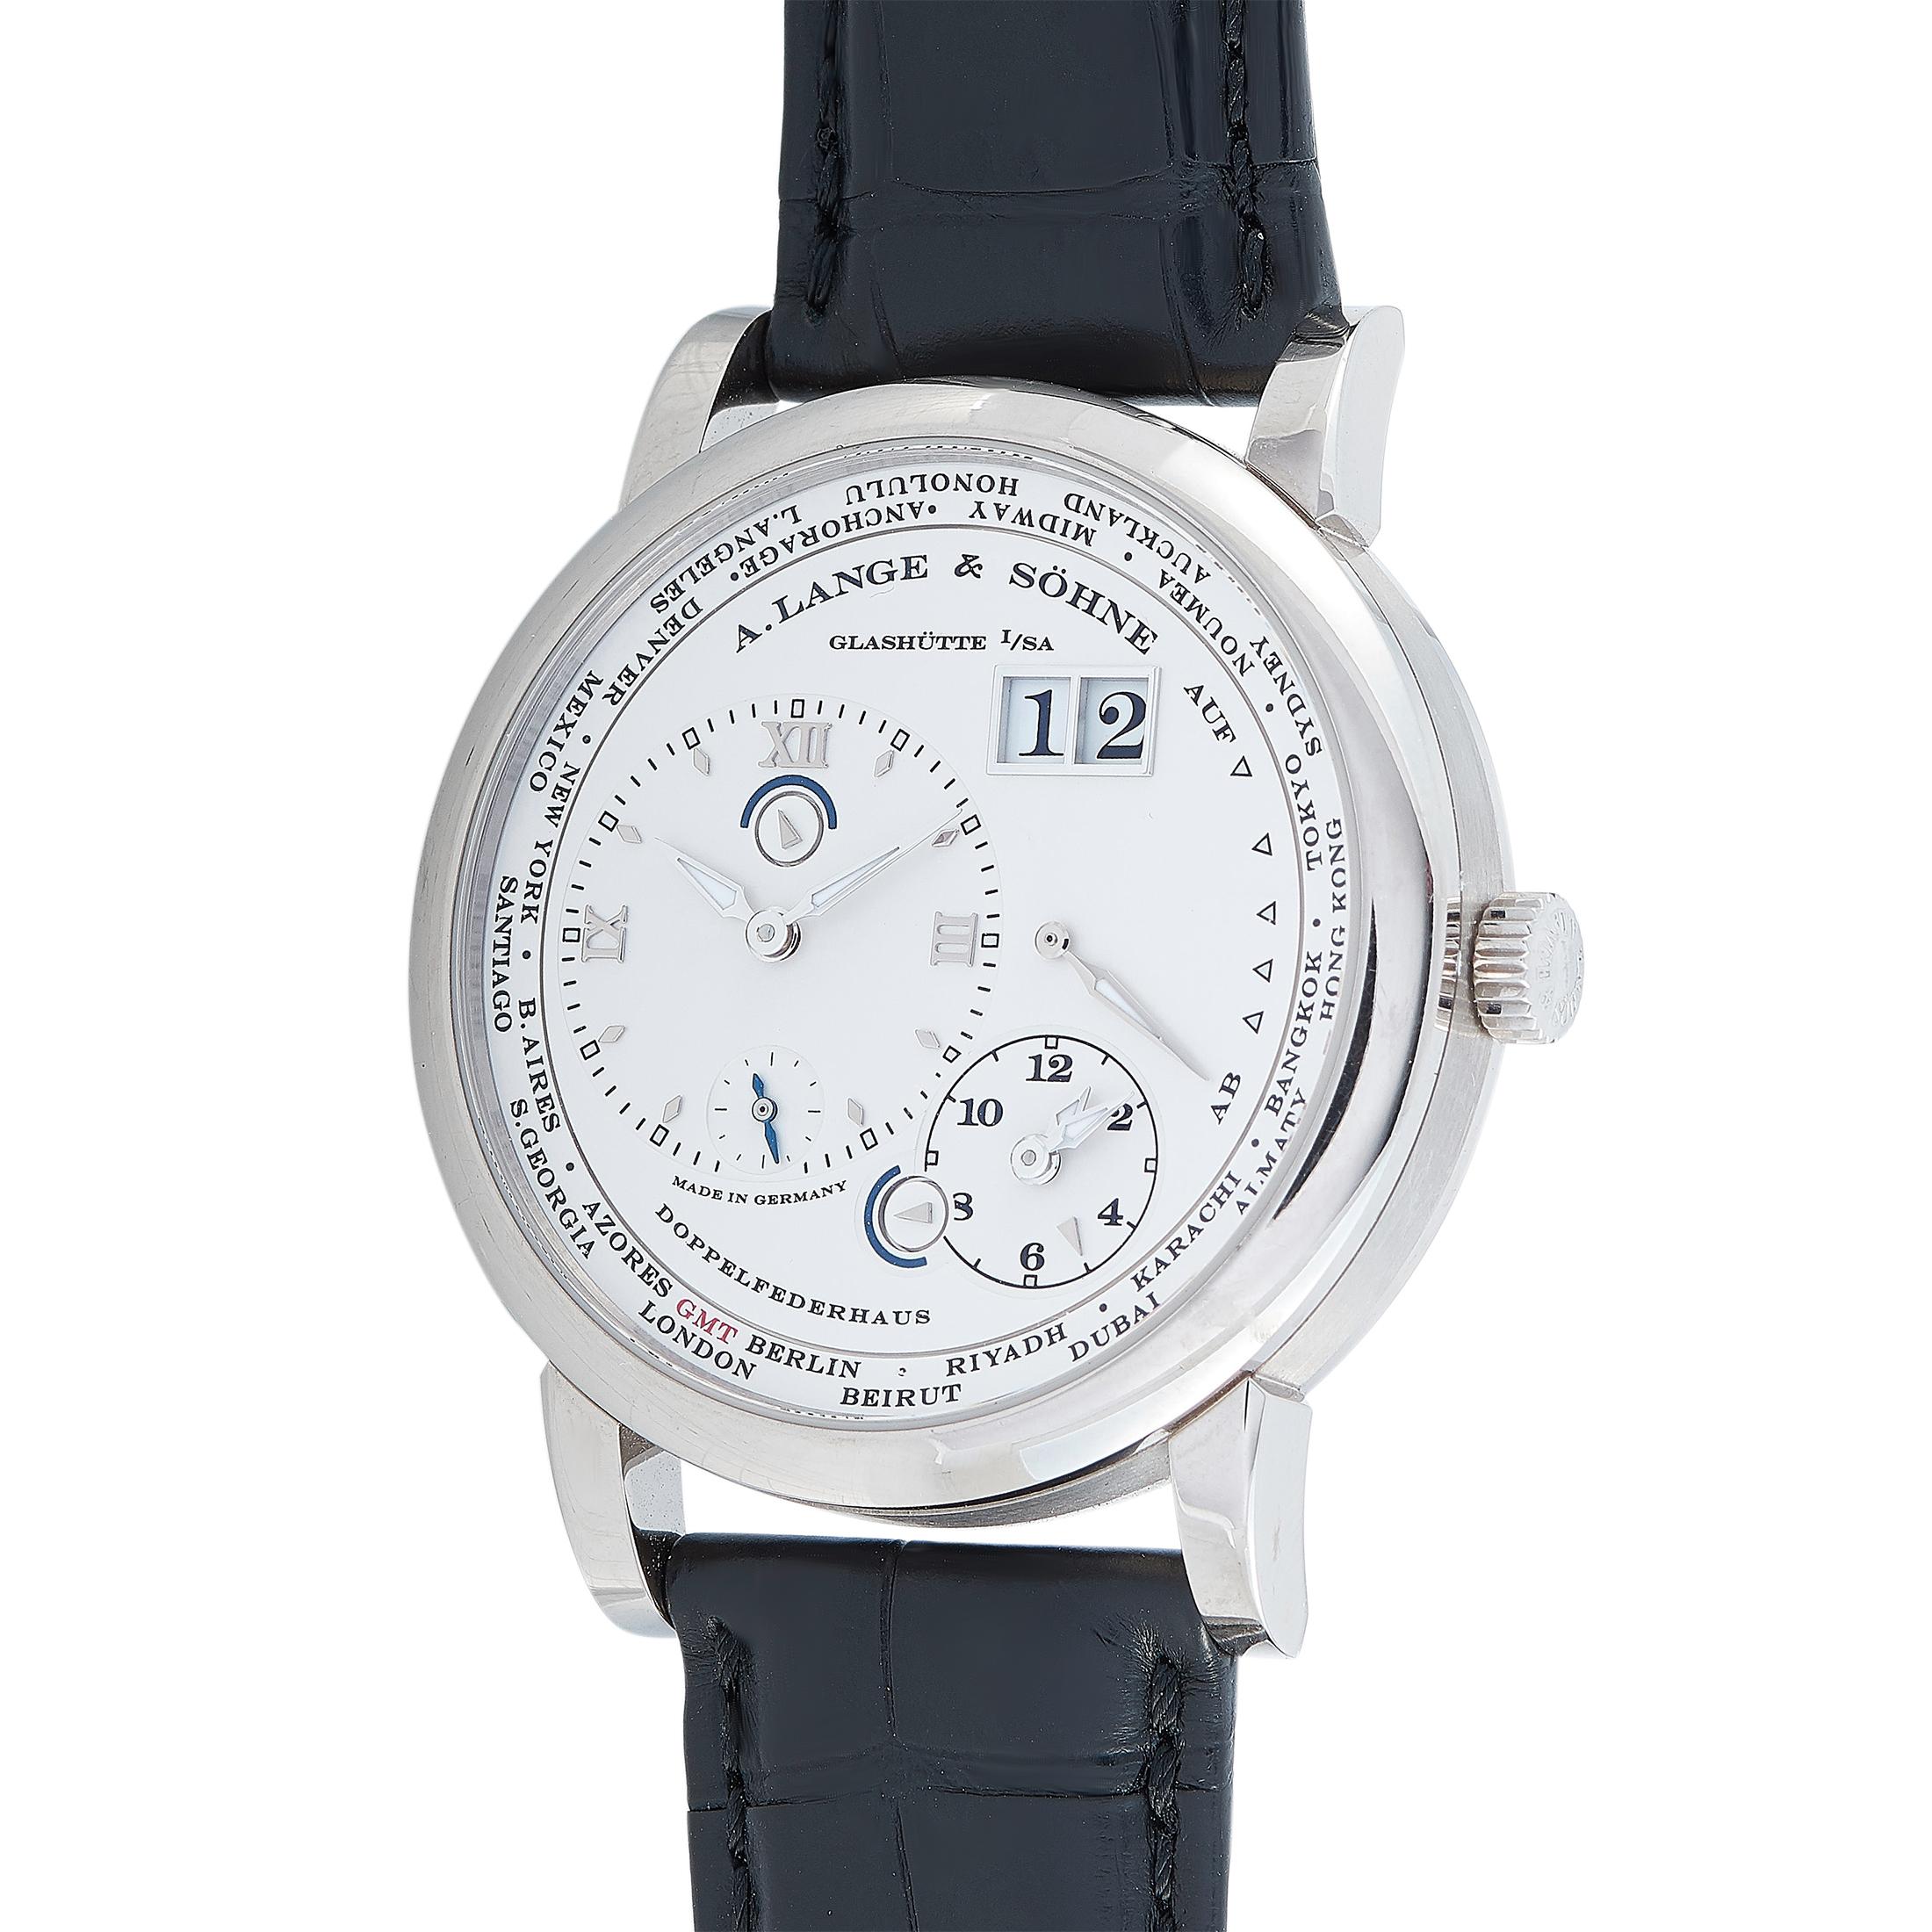 The A. Lange & Sohne Lange 1 Time Zone, reference number 116.039, is presented within the iconic “Lange 1” collection.

The watch comes with an 18K white gold case that boasts see-through back. The case is mounted onto a black alligator leather